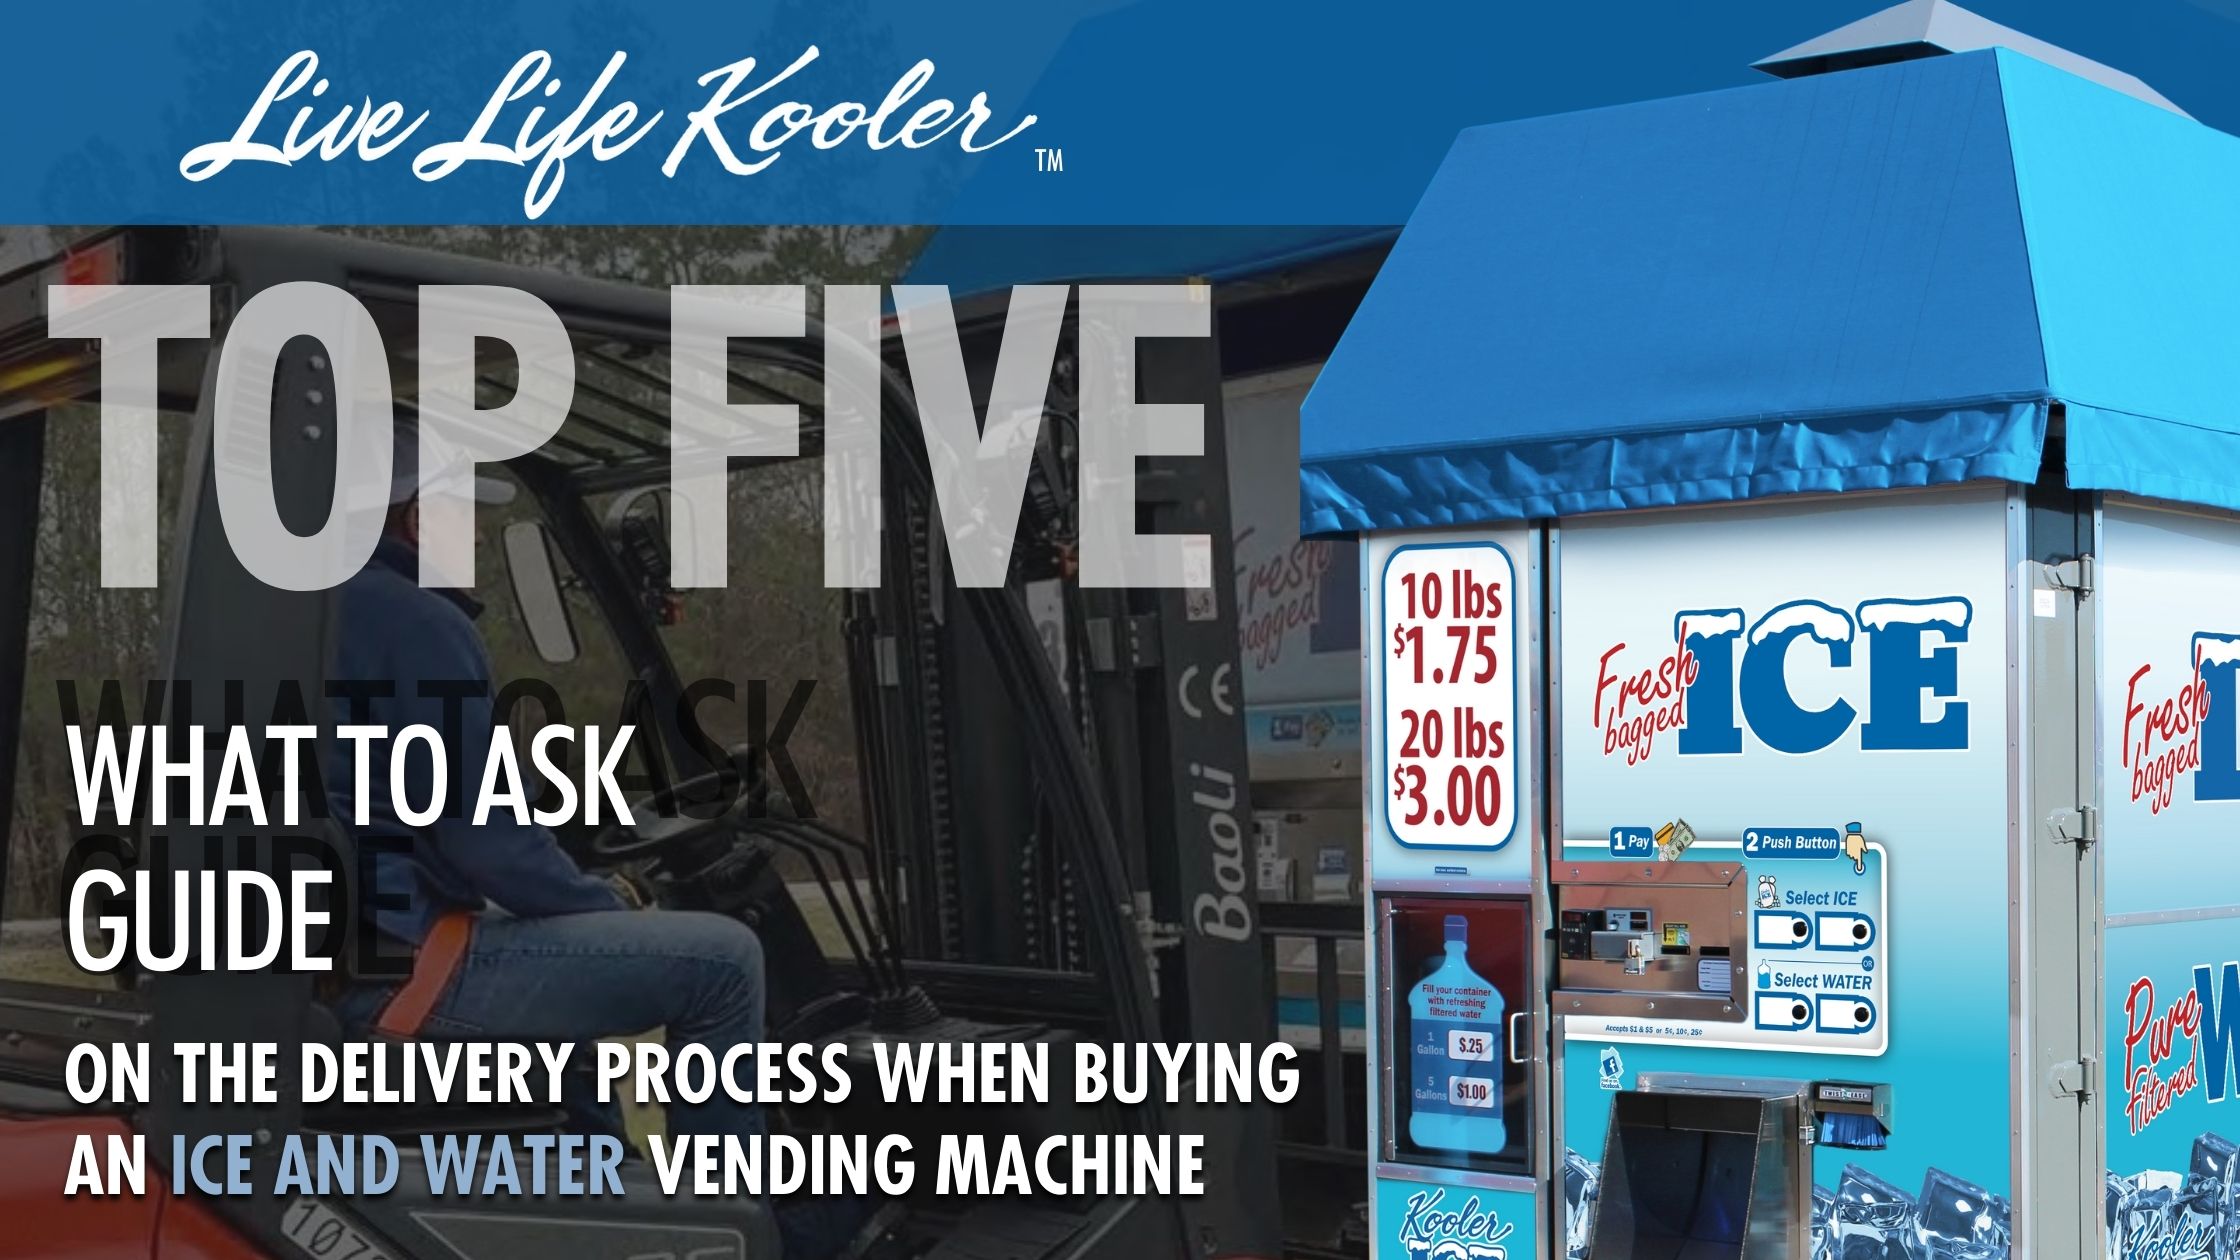 The Top Five Questions To Ask on the Delivery Process When Buying An Ice and Water Vending Machine